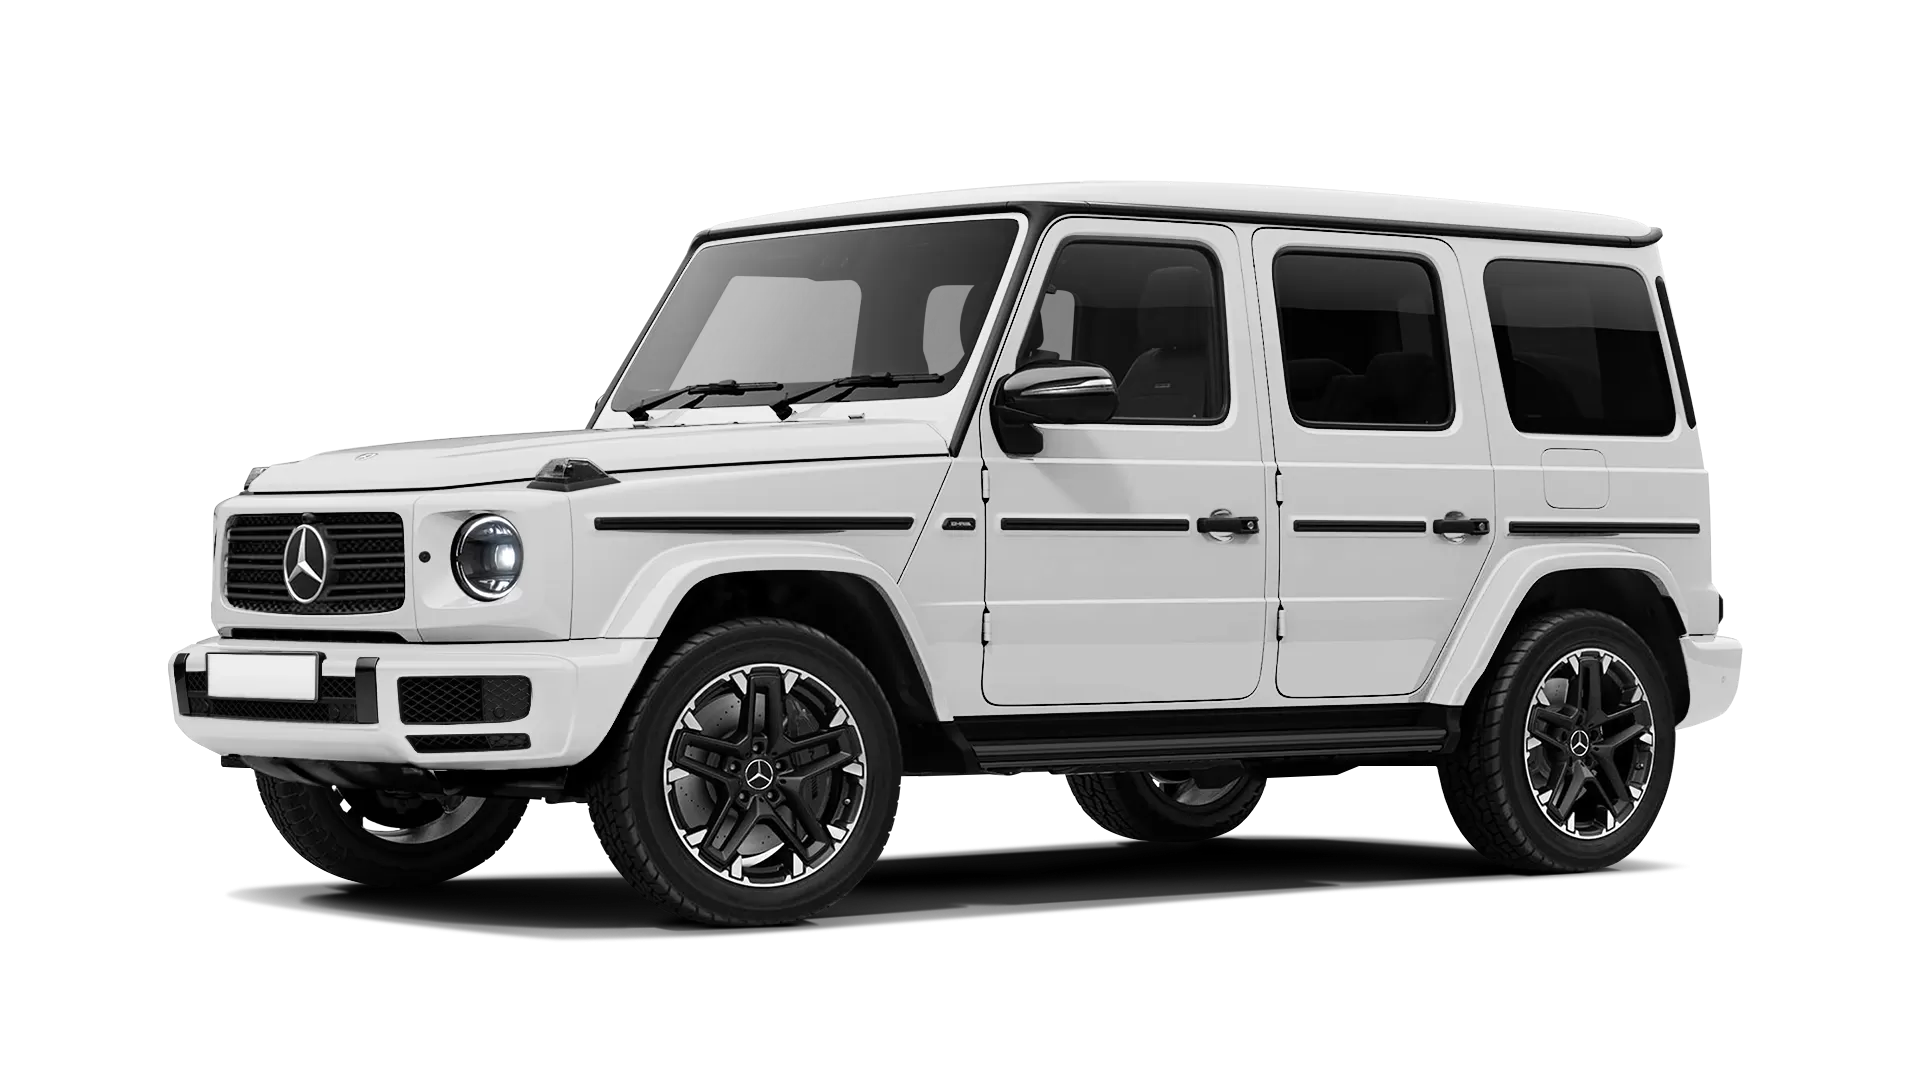 Mercedes G class W463 stock front view in Polar White color